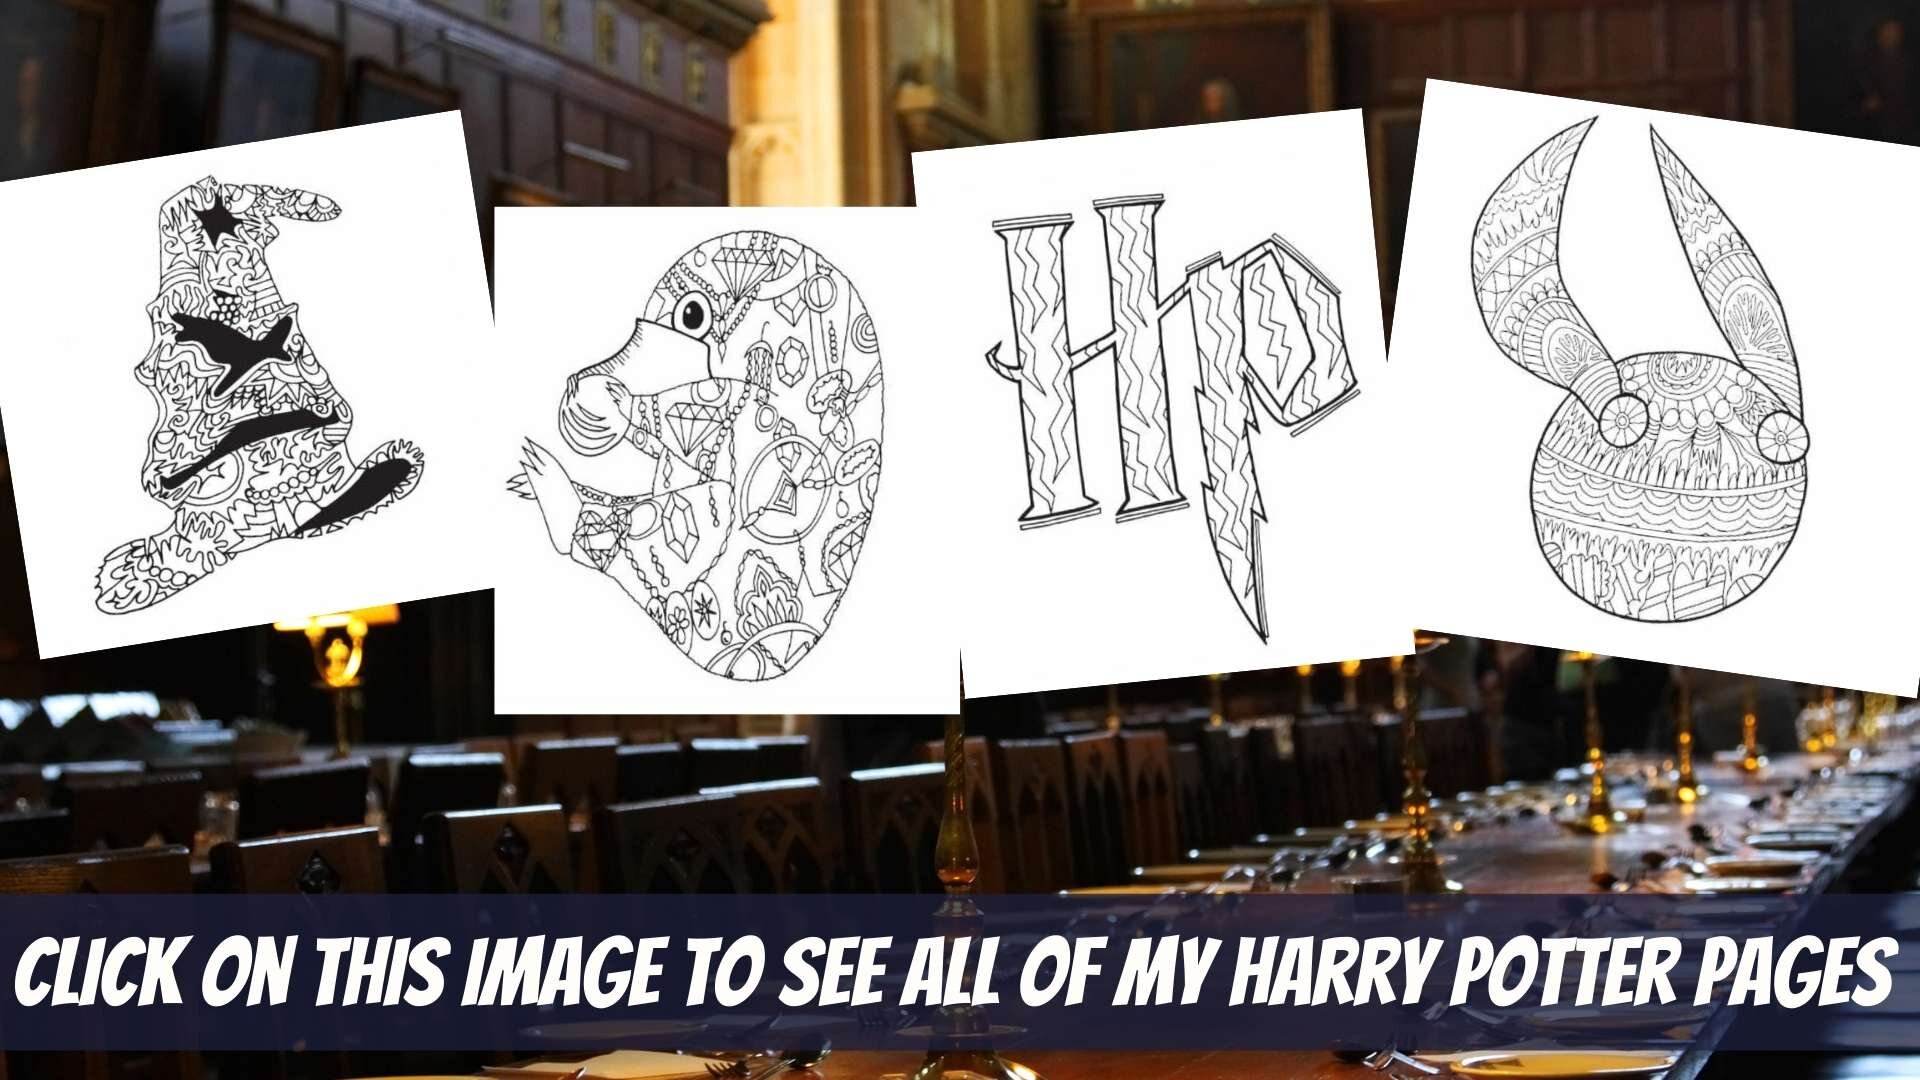 link to the Harry Potter collection